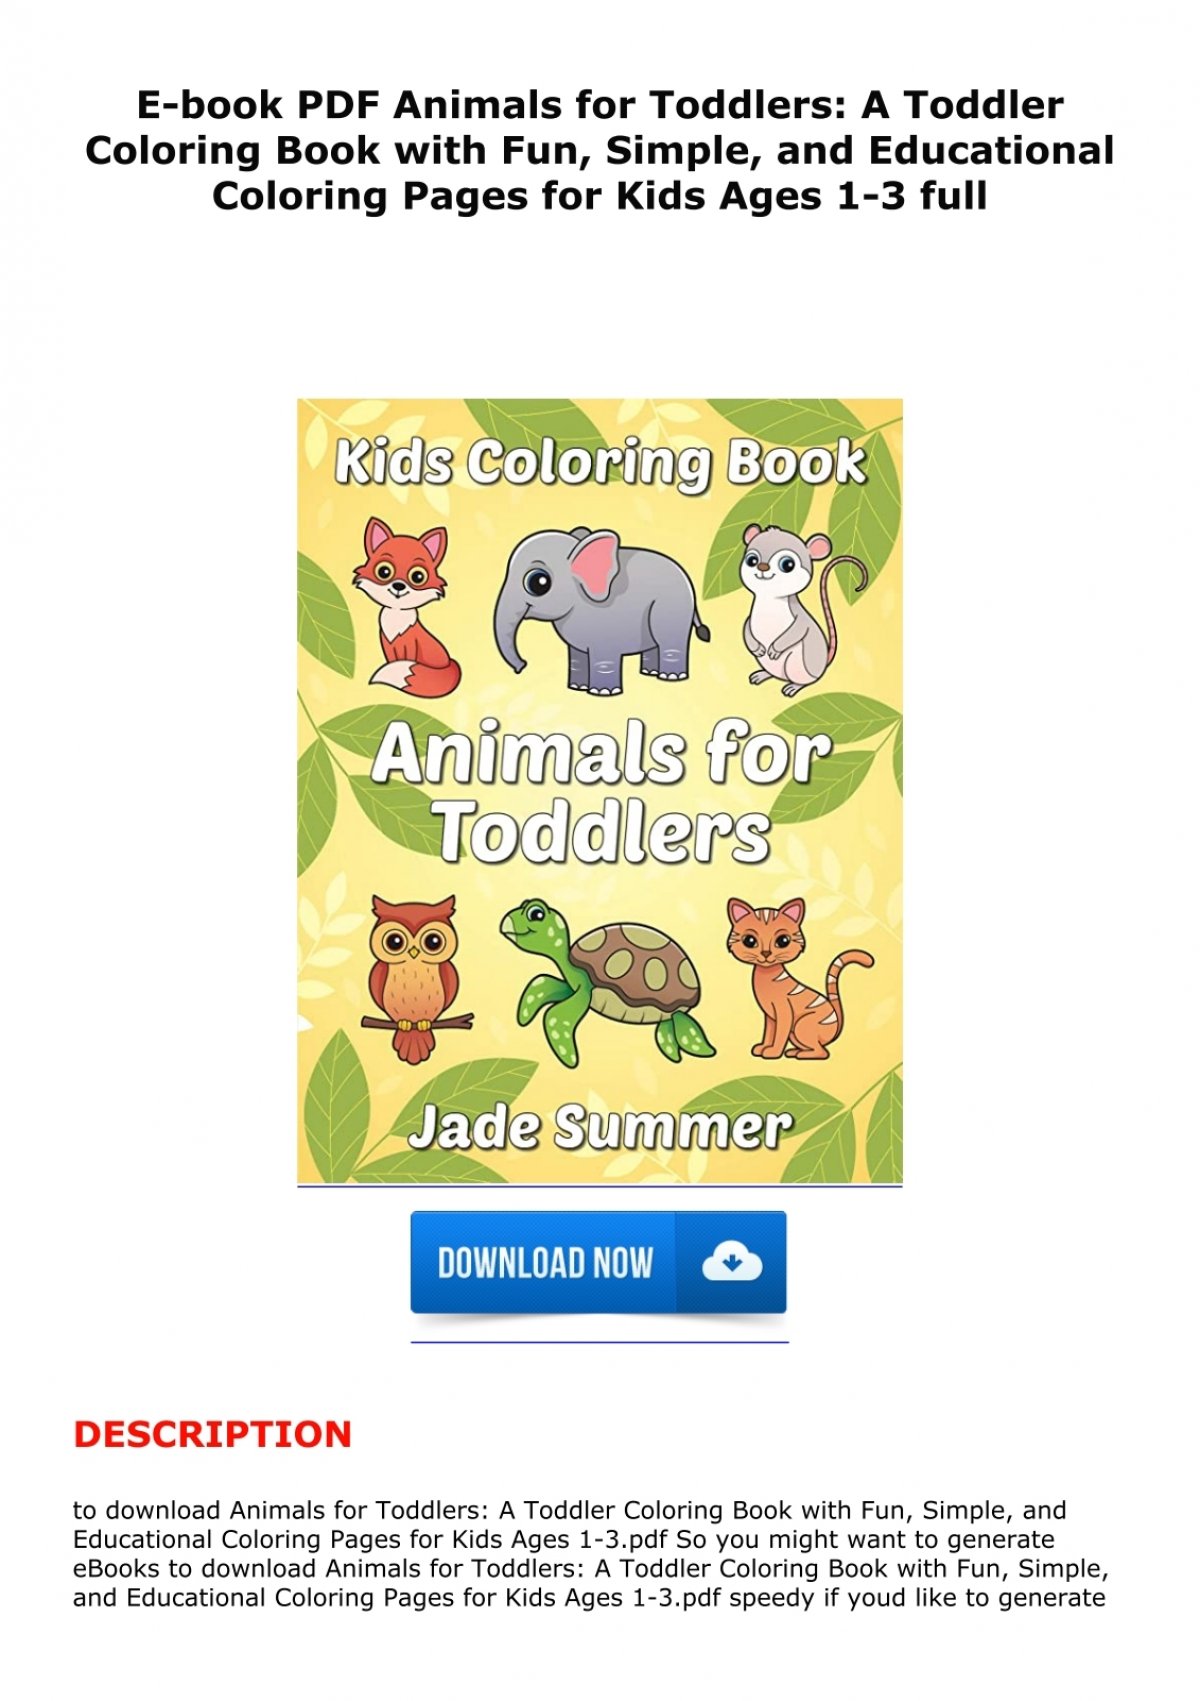 Download E Book Pdf Animals For Toddlers A Toddler Coloring Book With Fun Simple And Educational Coloring Pages For Kids Ages 1 3 Full